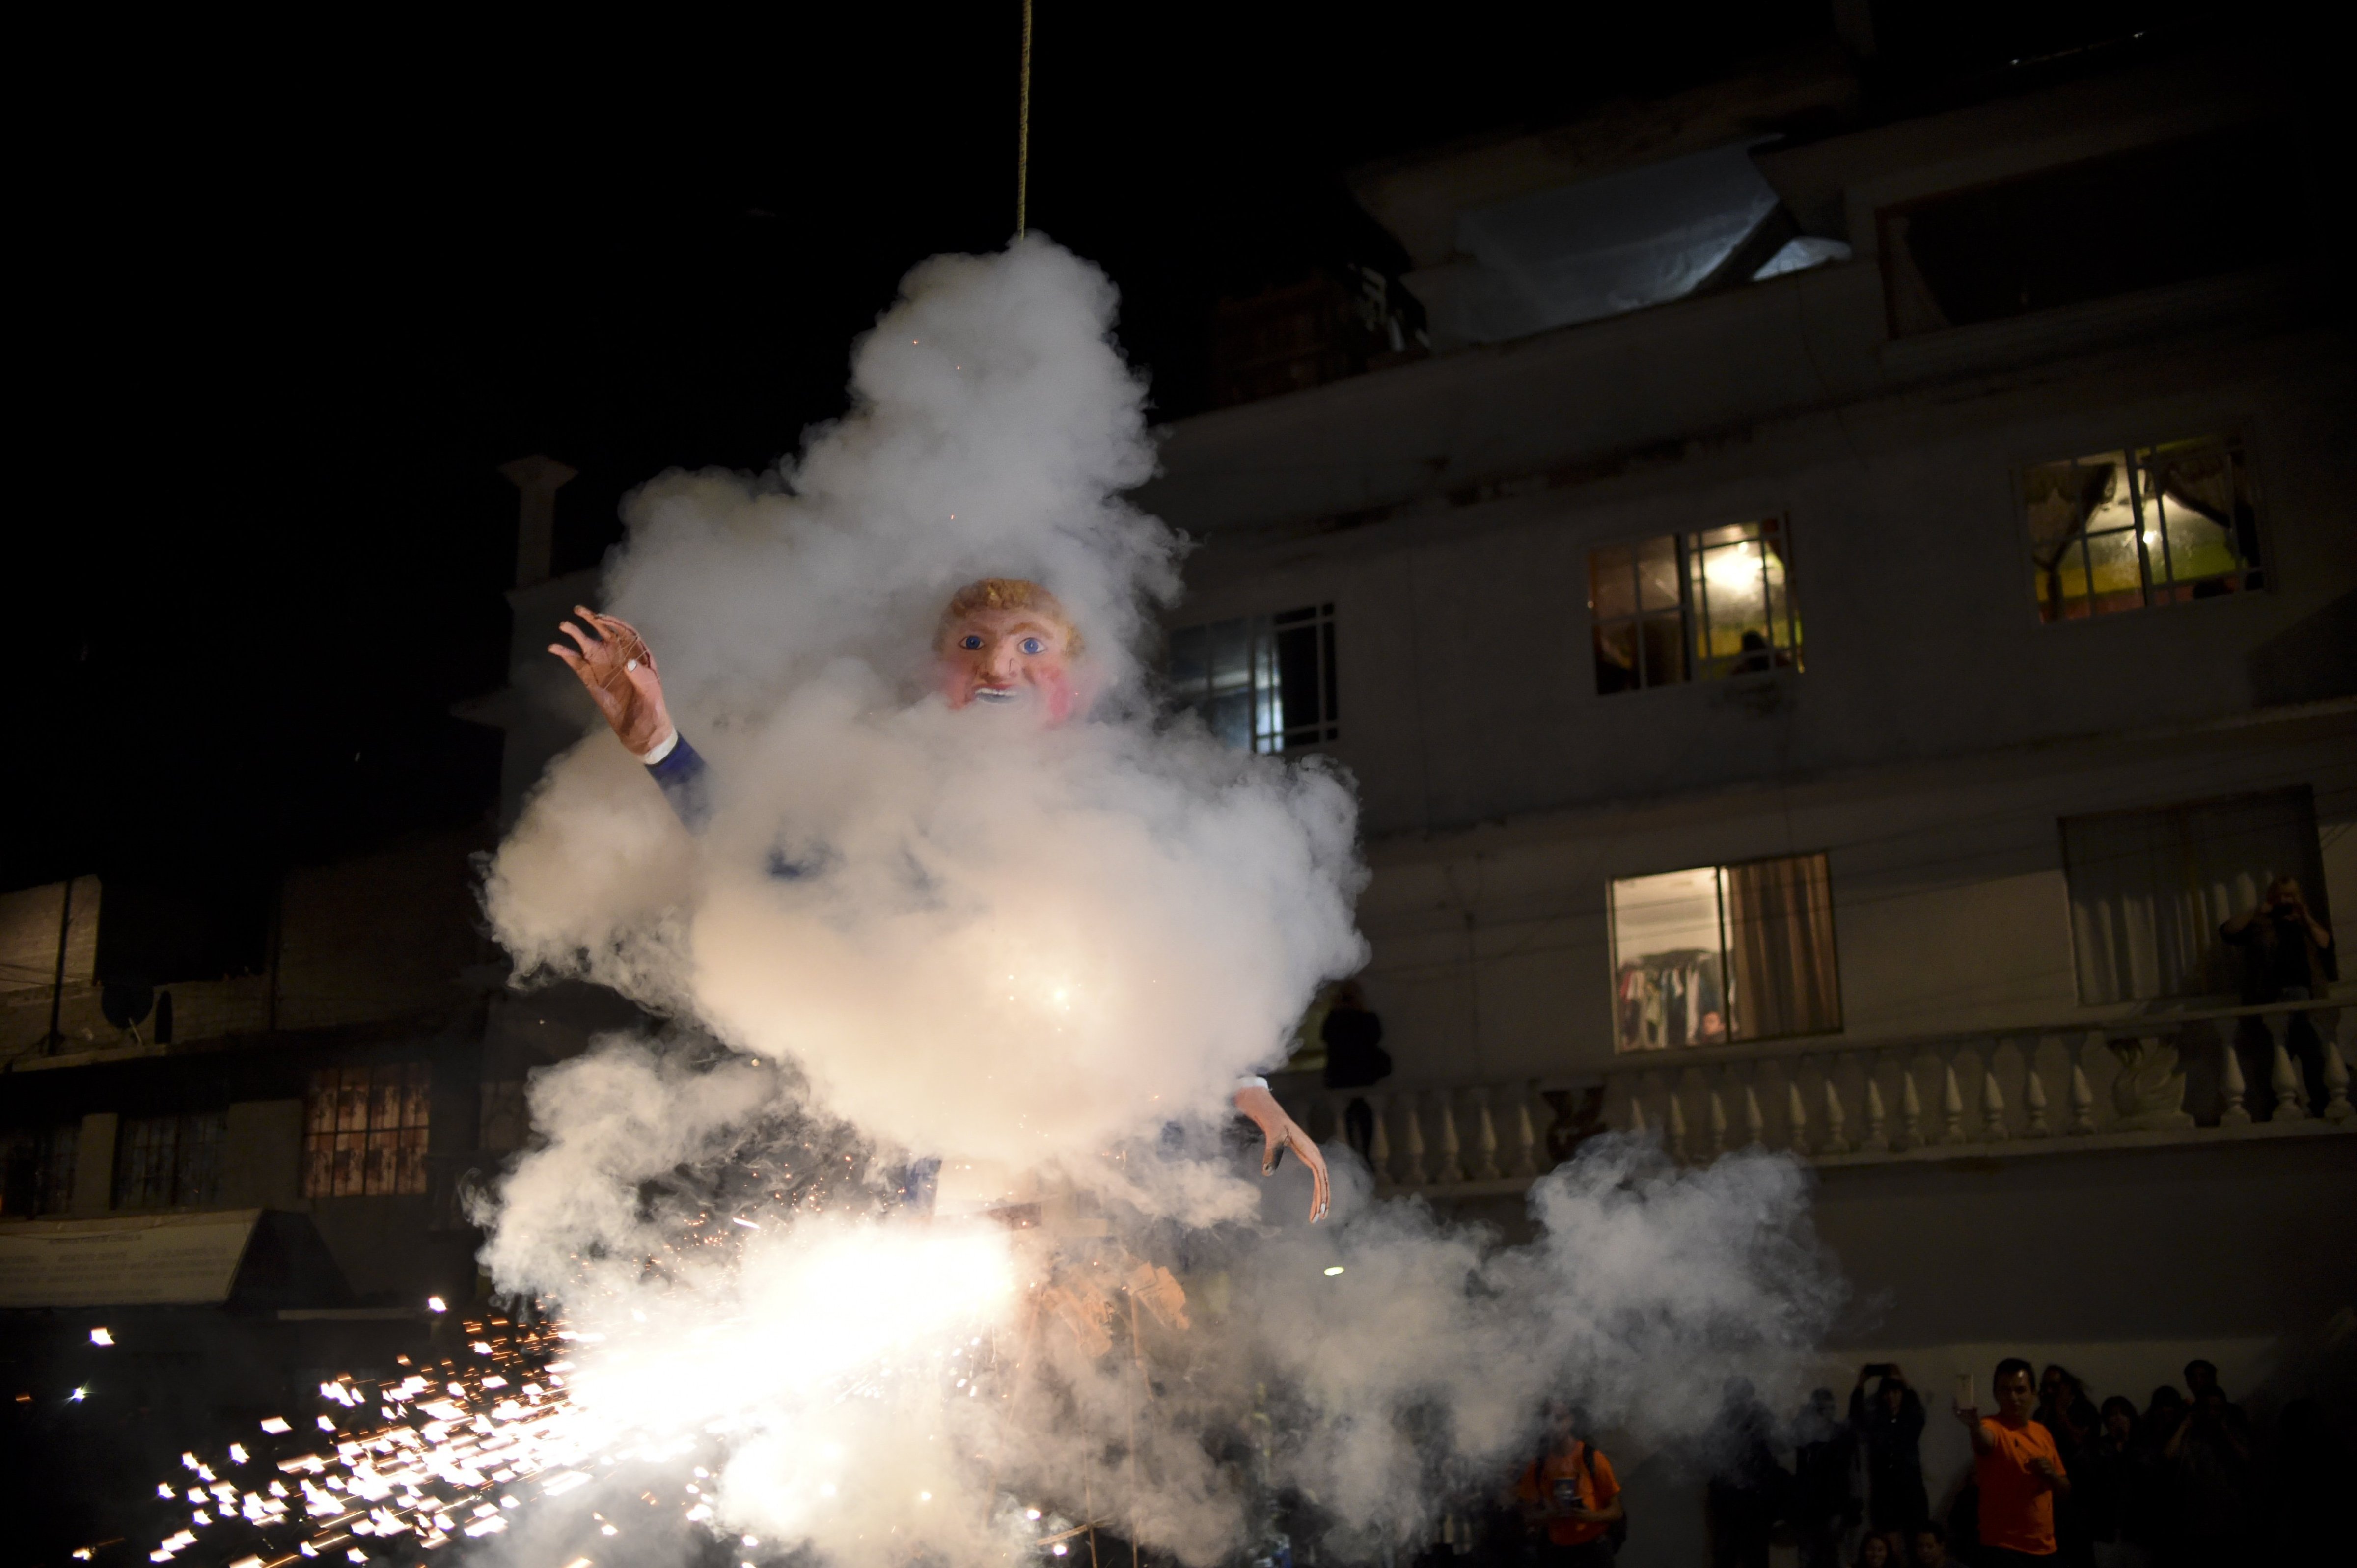 Mexicans set fire to an effigy of Donald Trump in Mexico City on March 26, 2016. (Yuri Cortez—AFP/Getty Images)